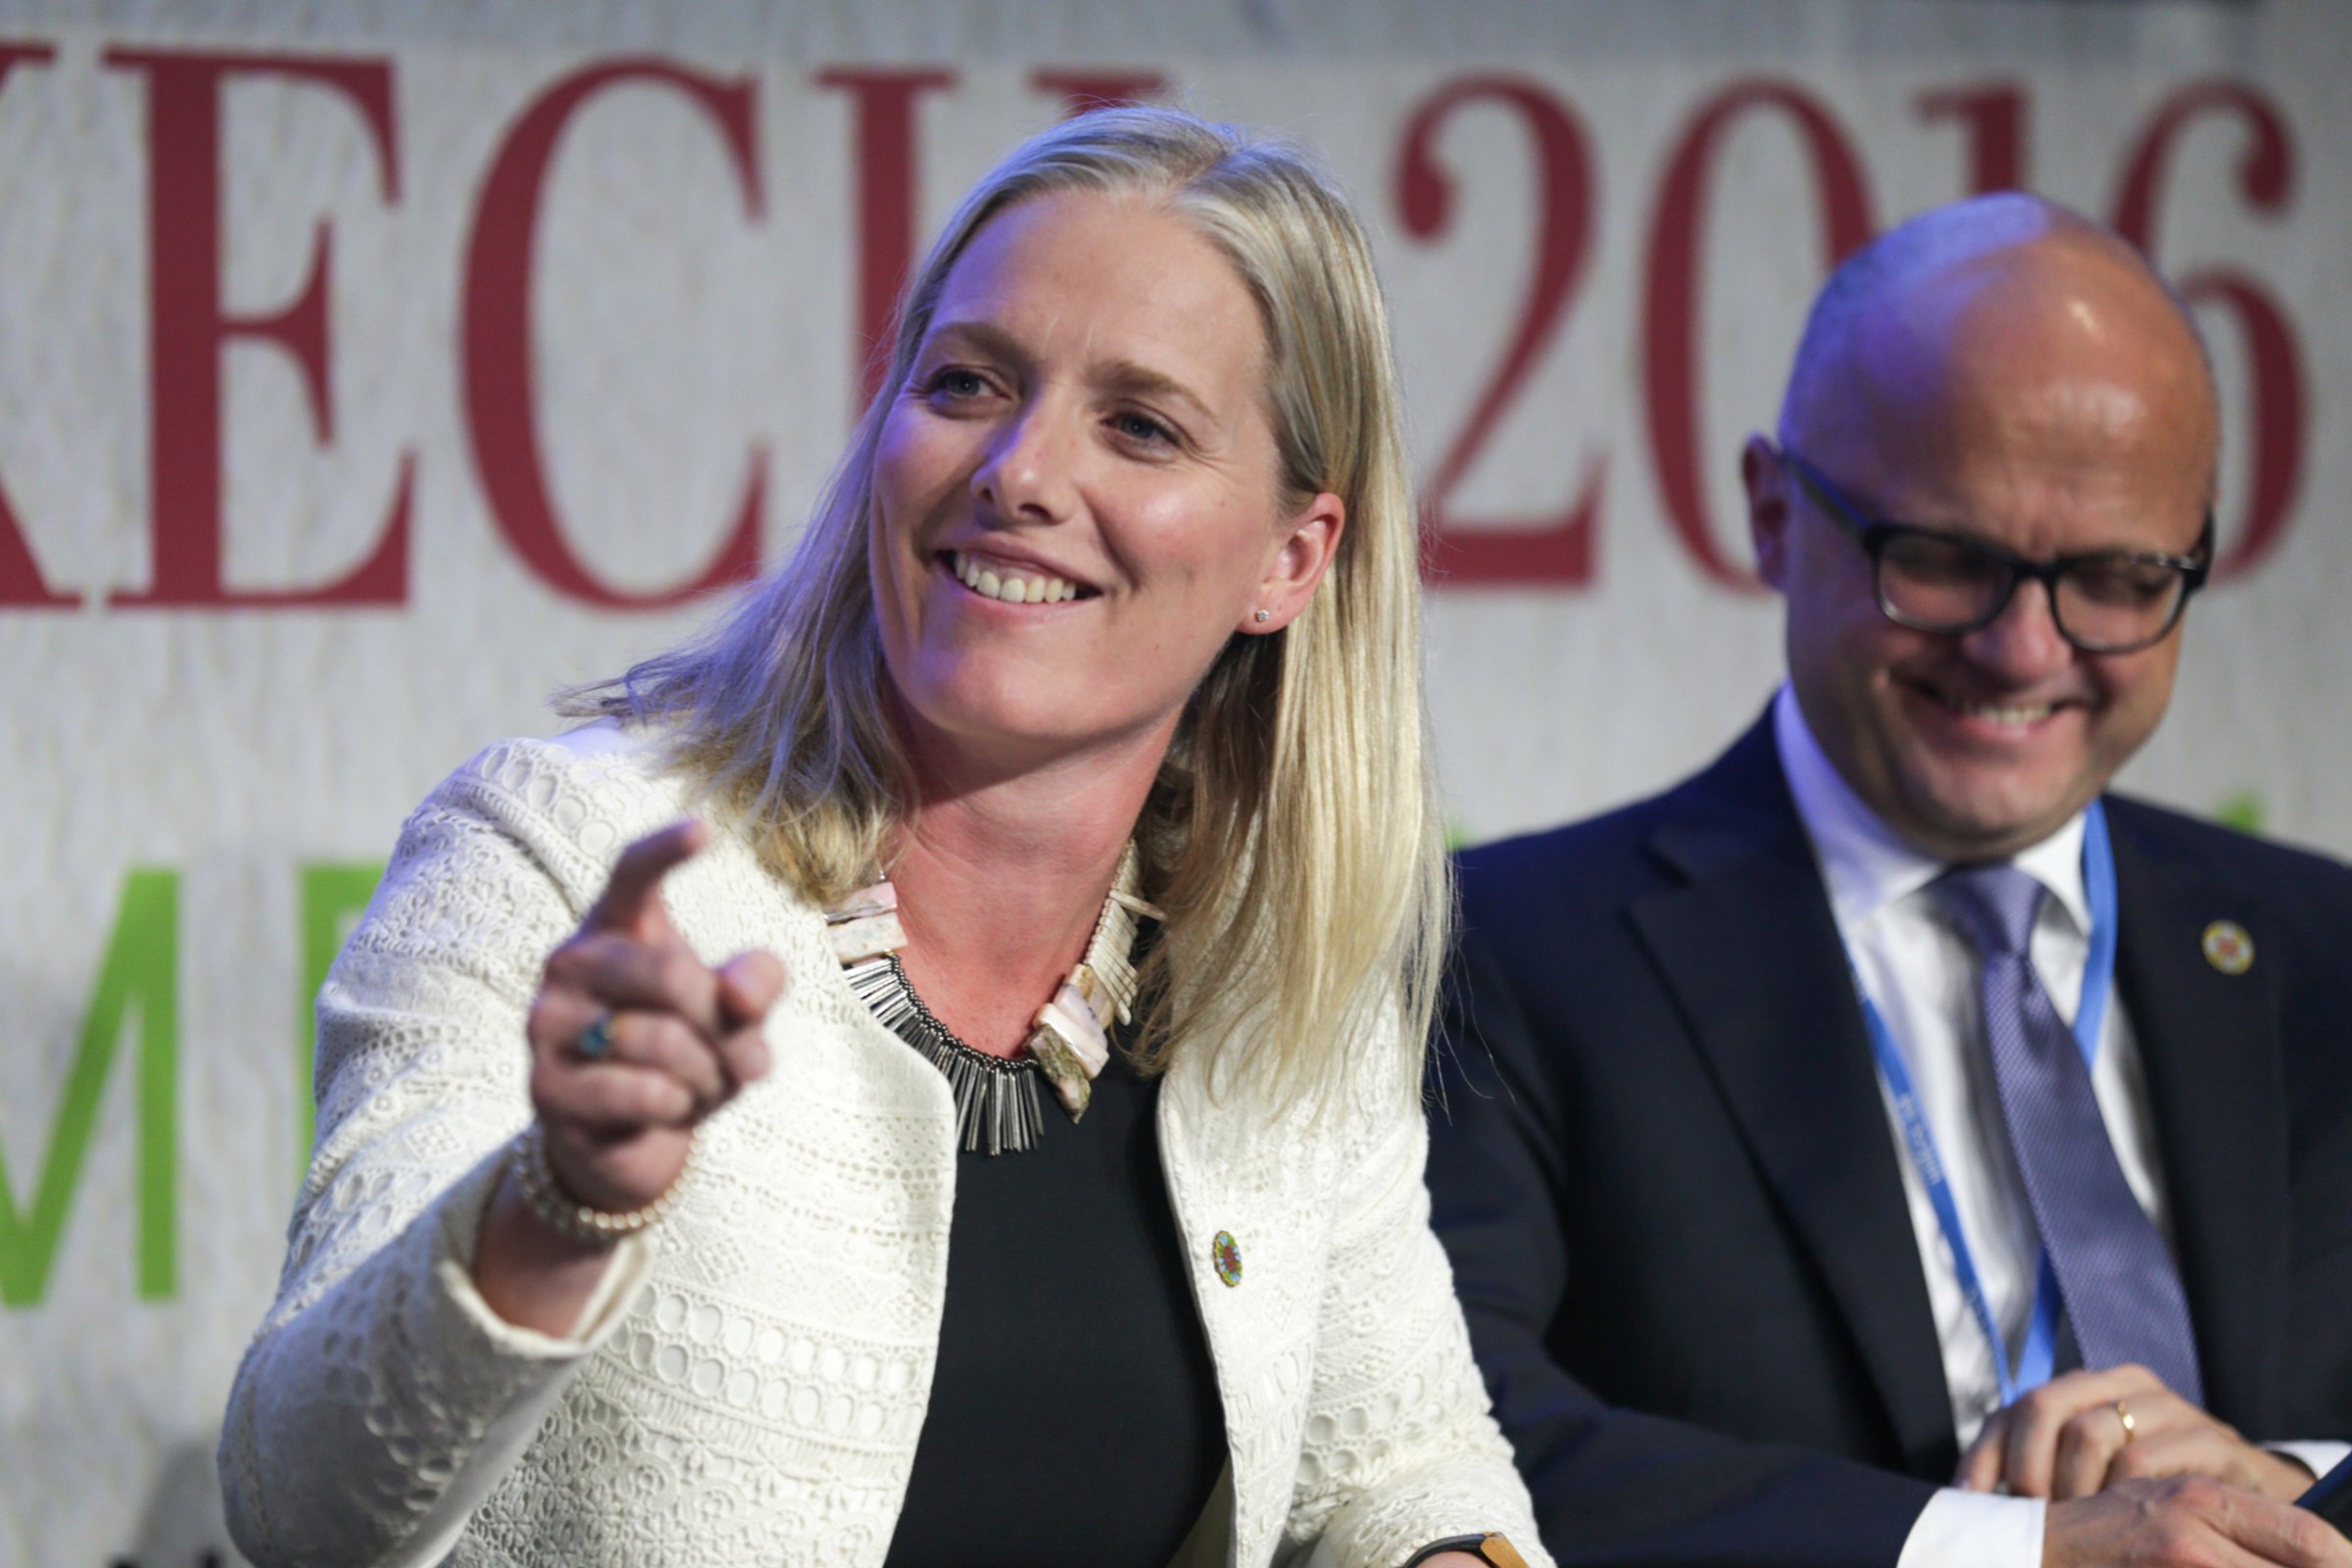 Catherine McKenna, Minister of Environment and Climate Change of Canada, reacts during the launch of the 2050 Pathways Platform, at the COP22 climate change conference, in Marrakech, Morocco, Thursday, Nov. 17, 2016. (AP Photo/Mosa'ab Elshamy)